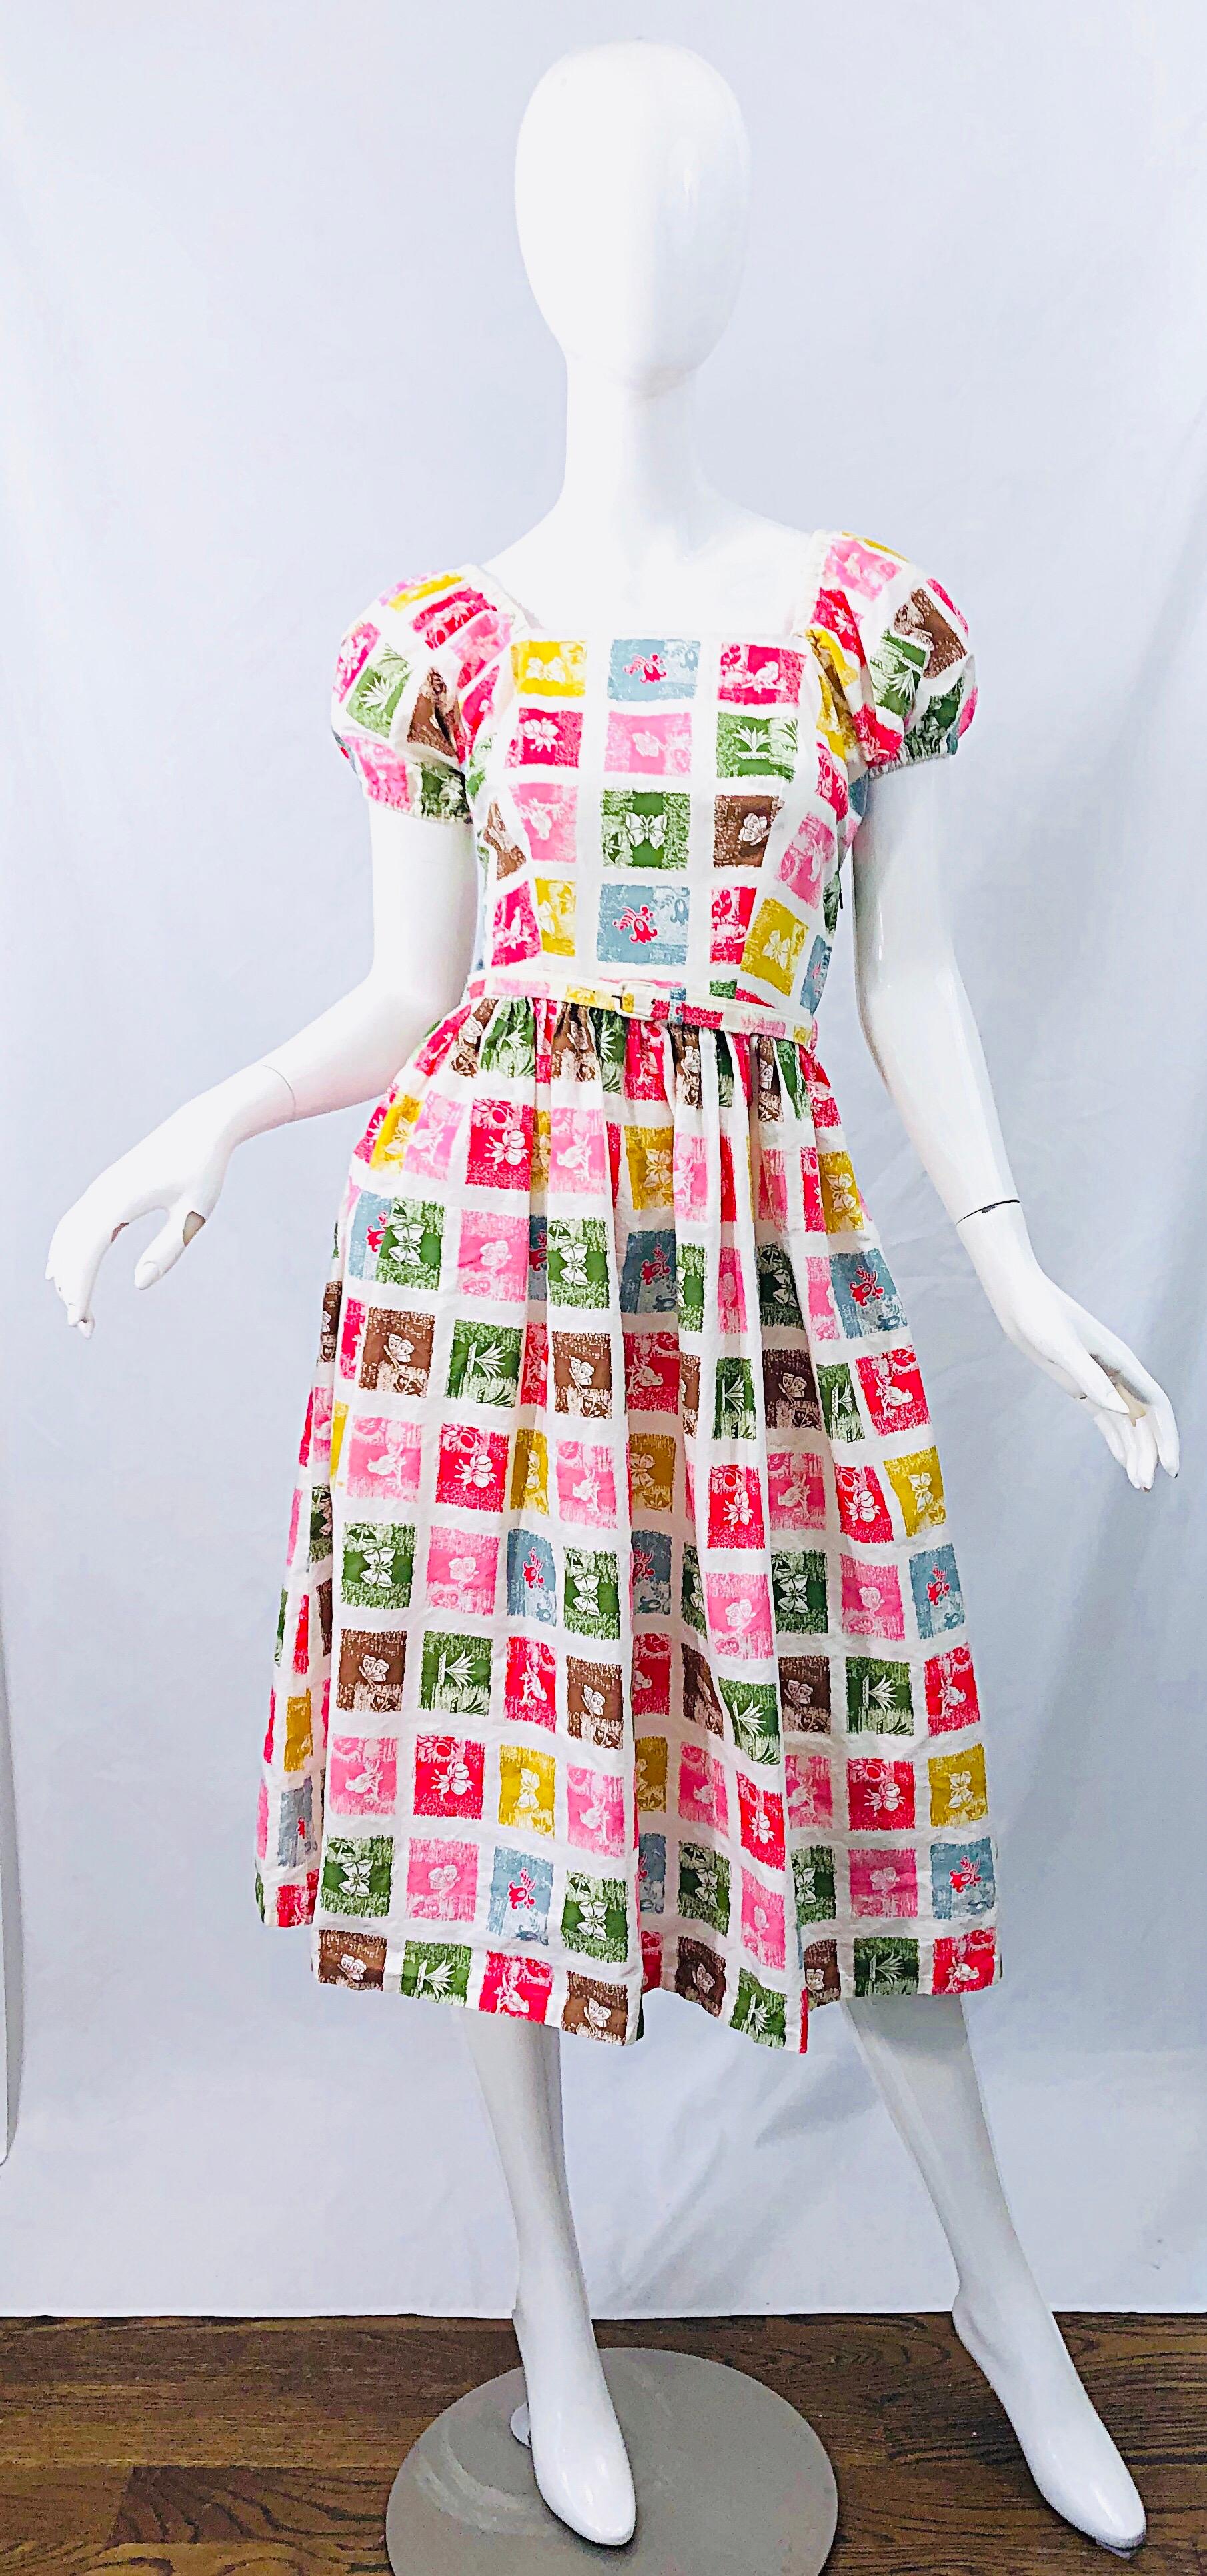 Super chic 1950s novelty print colorful fit n' flare belted cotton dress ! Features a white background with vibrant pops of pink, chartreuse green, yellow, brown and red throughout. Prints of birds, flowers and butterflies throughout. Stylish puff